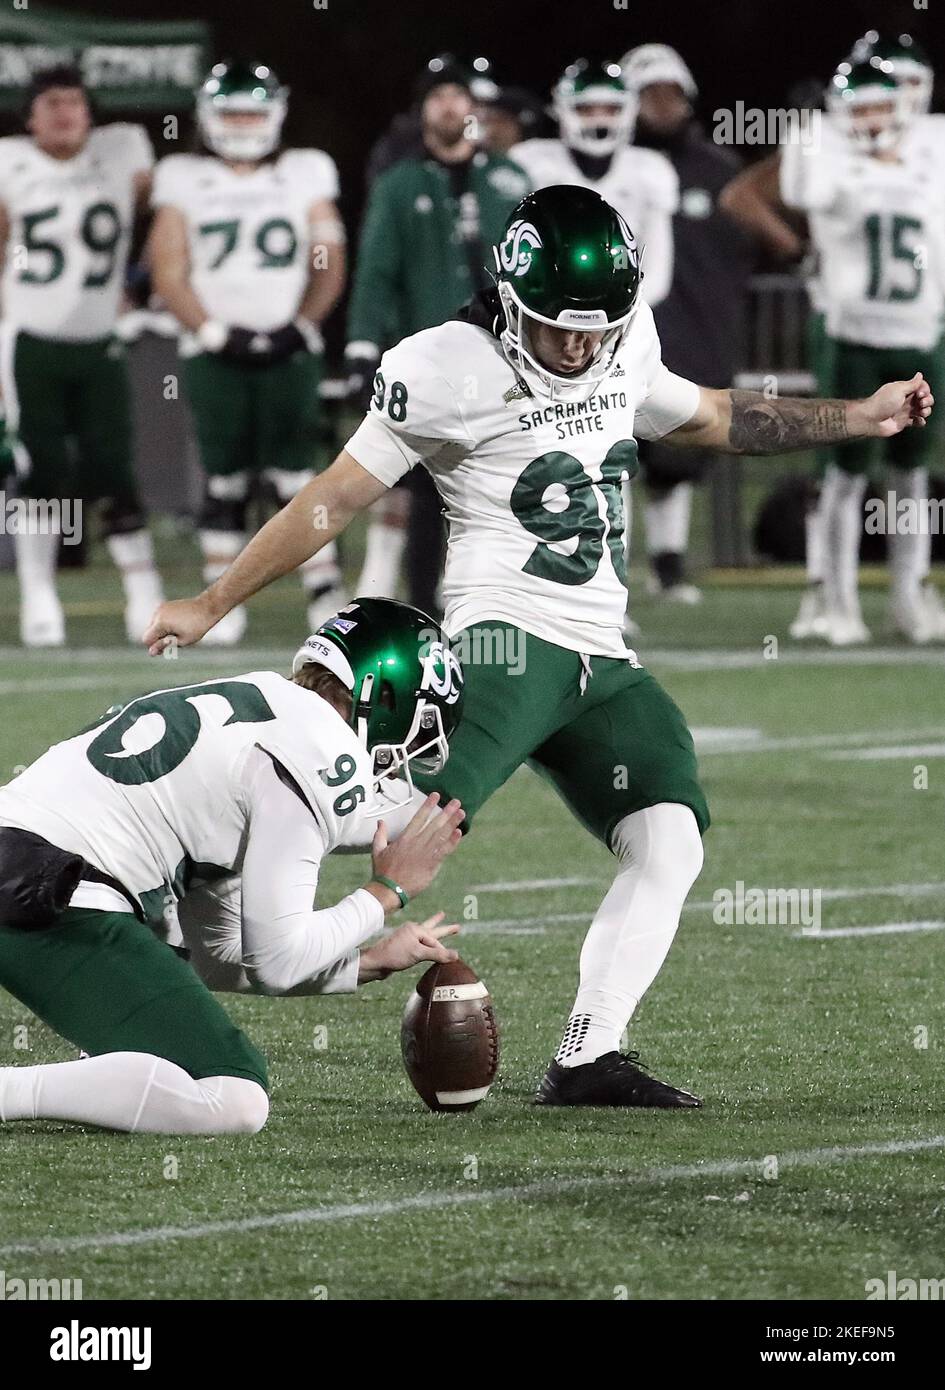 Hilsboro Stadium, Hillsboro, OR, USA. 11th Nov, 2022. Sacramento State Hornets punter Connor Stutz (96) performs point after duties during the NCAA football game between the Hornets of Sac State and the Portland State Vikings at Hilsboro Stadium, Hillsboro, OR. Larry C. Lawson/CSM (Cal Sport Media via AP Images). Credit: csm/Alamy Live News Stock Photo